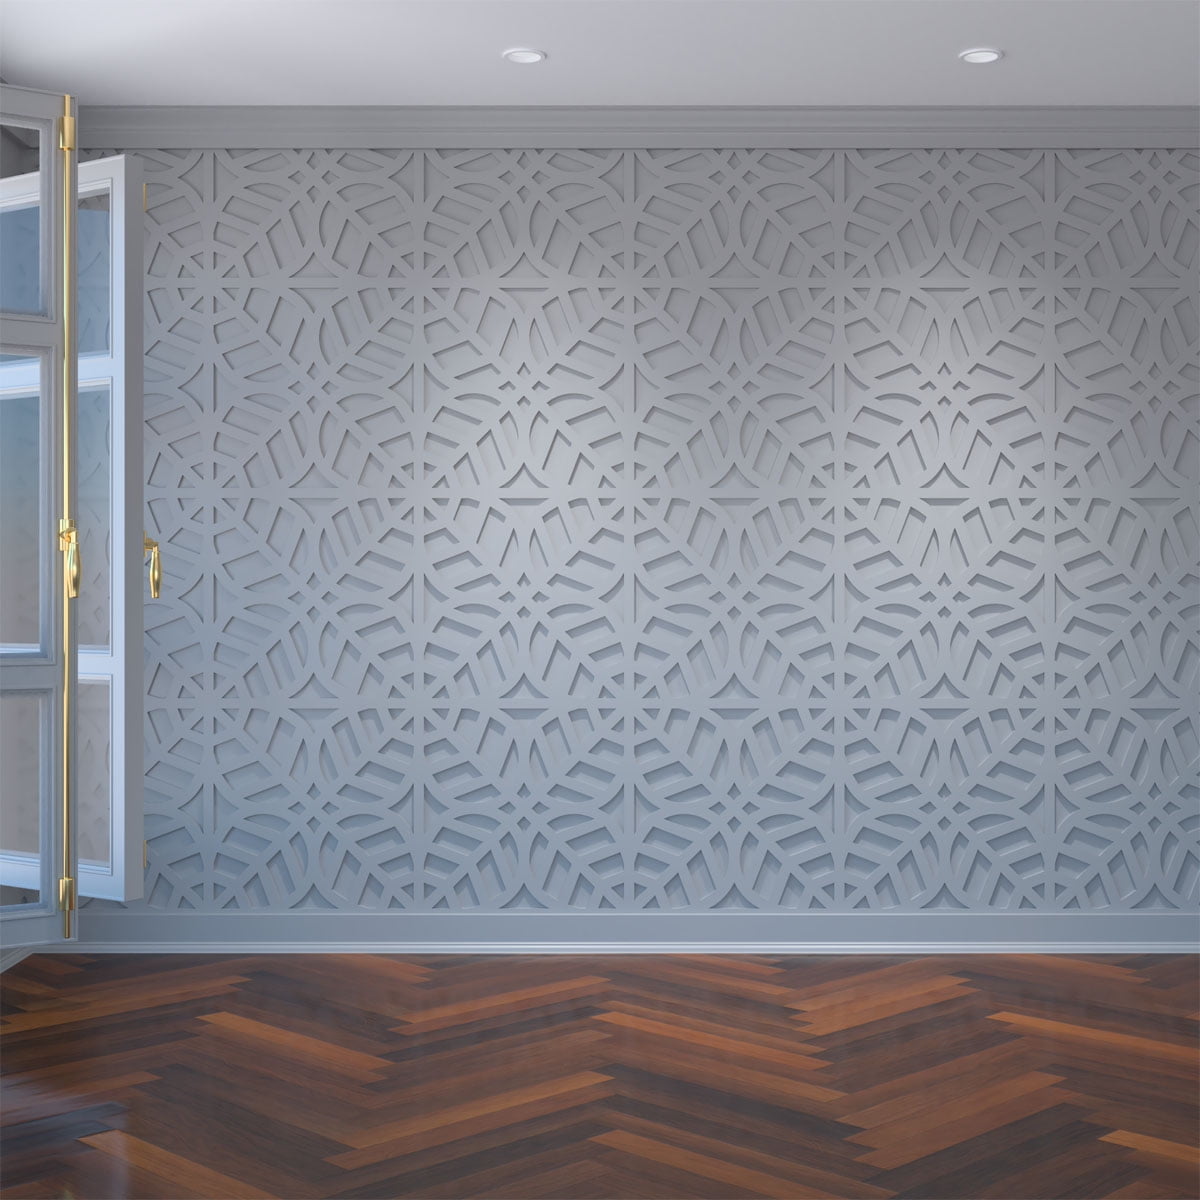 Large Garland Decorative Fretwork Wall Panels in Architectural Grade ...